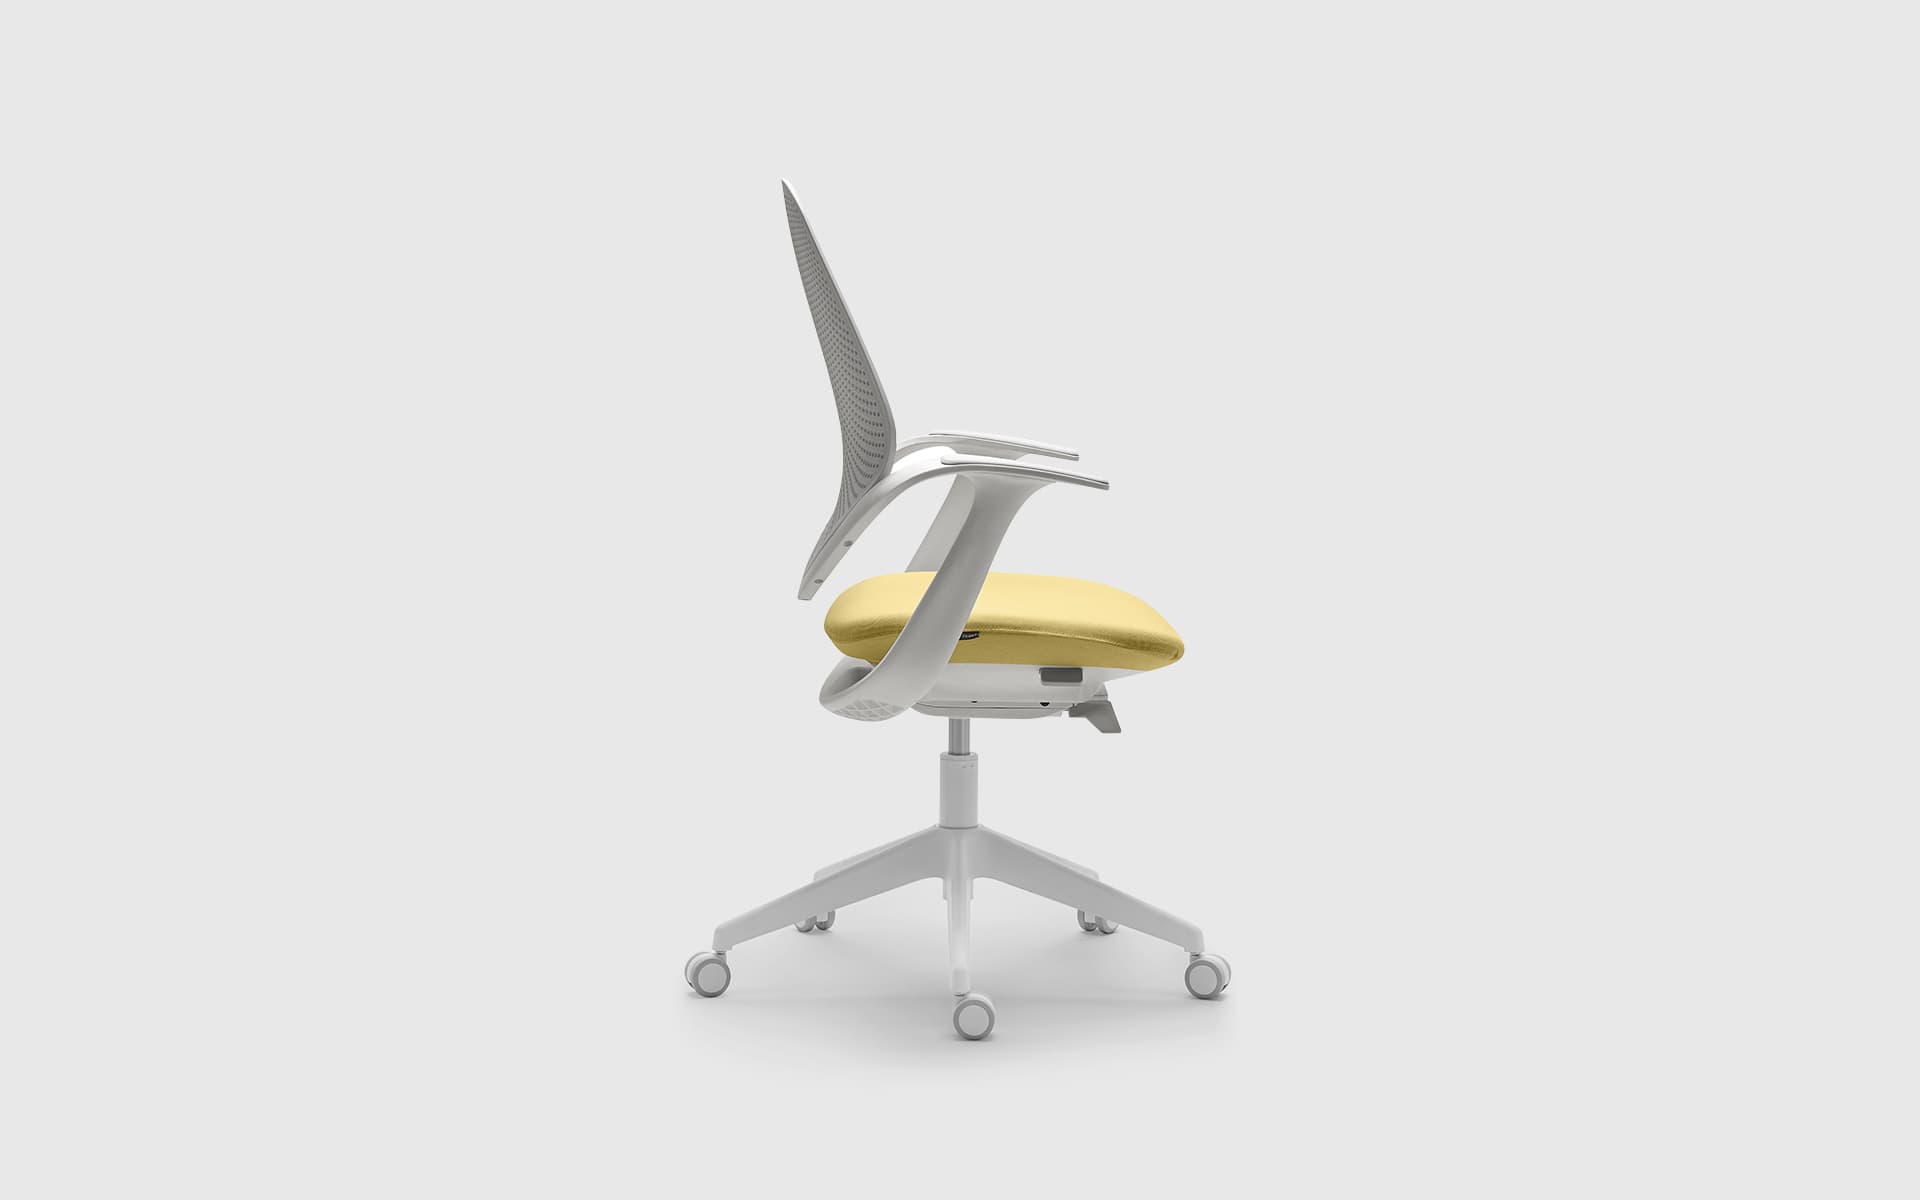 Lateral view of a Forma 5 Flow office chair by ITO Design with padded seating surface in yellow, back and armrests in white.